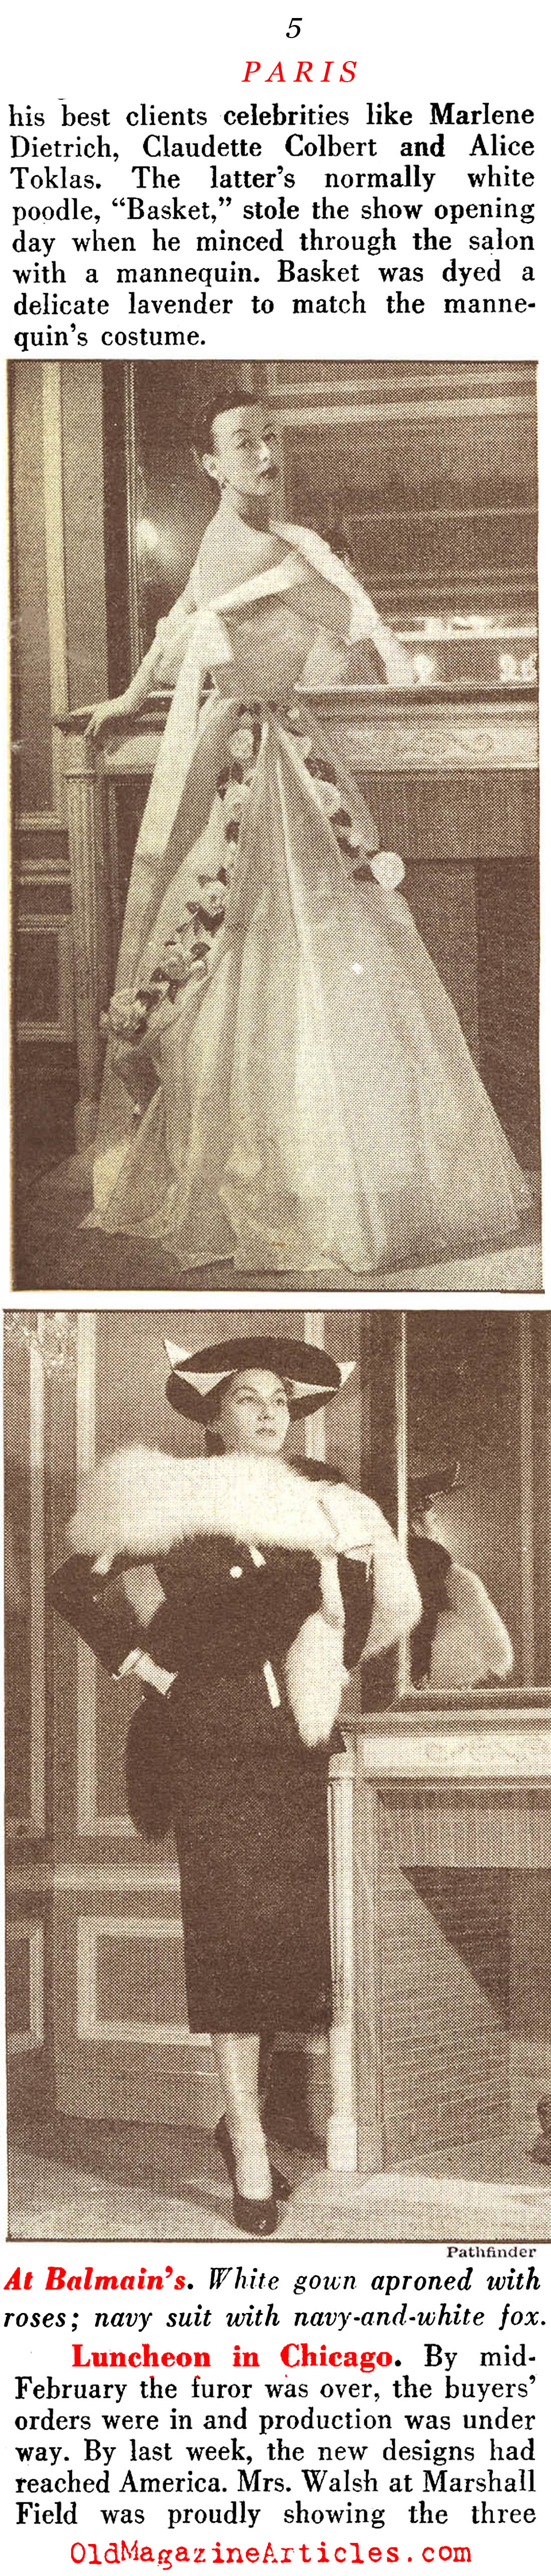 Setting the Trends from Paris (Pathfinder Magazine, 1951)